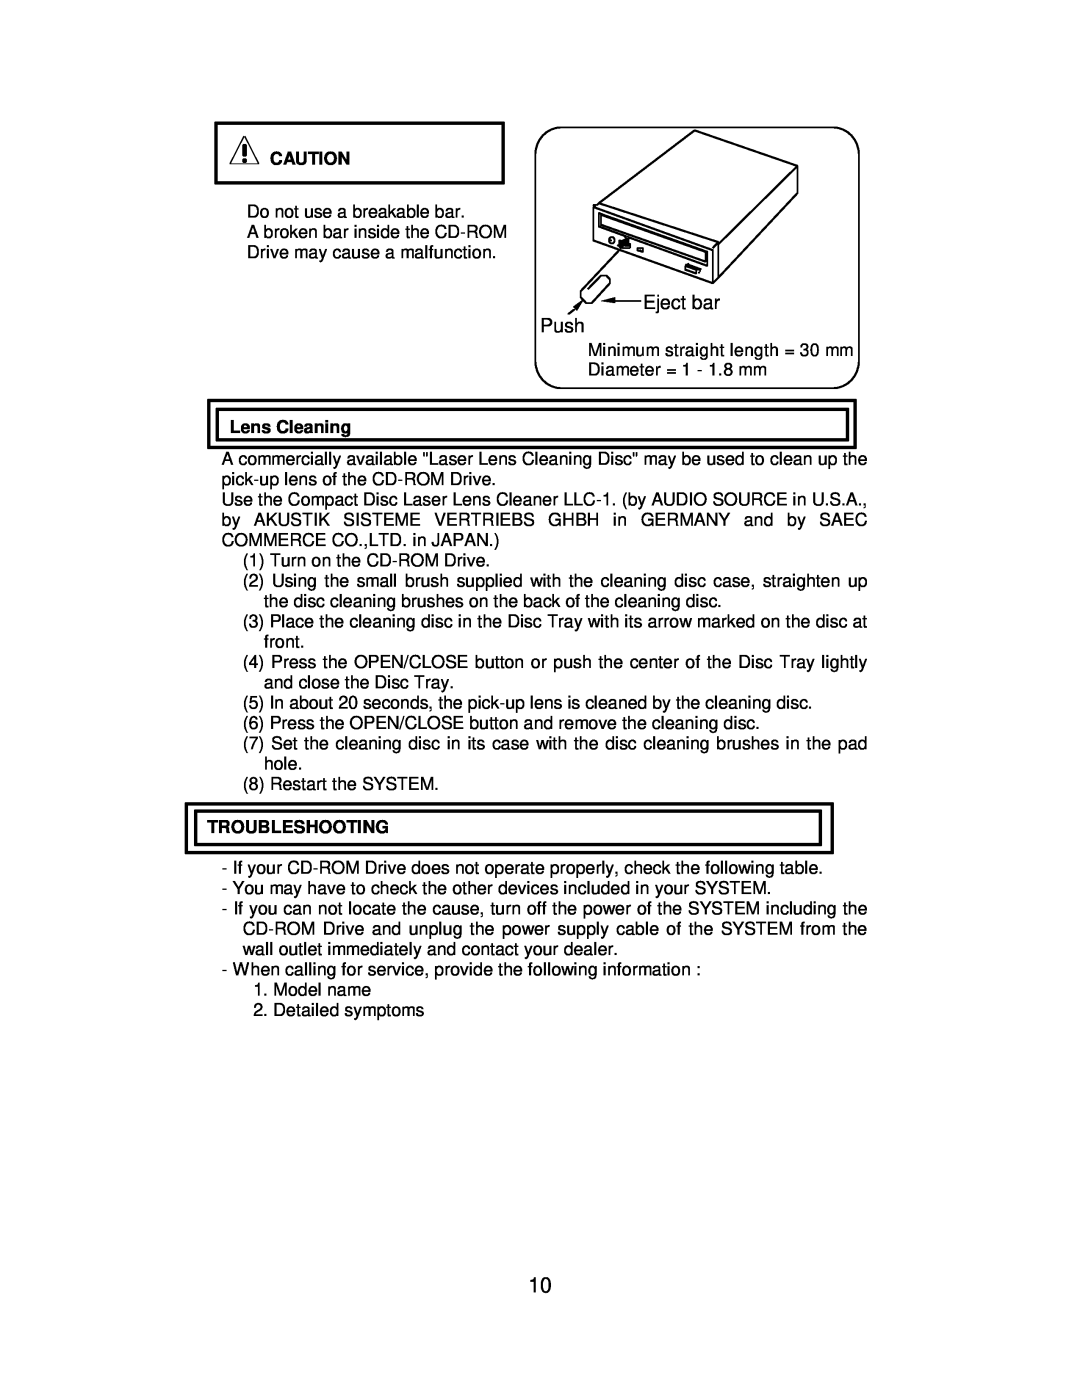 Hitachi CDR-8130 instruction manual Eject bar Push, Lens Cleaning, Troubleshooting 